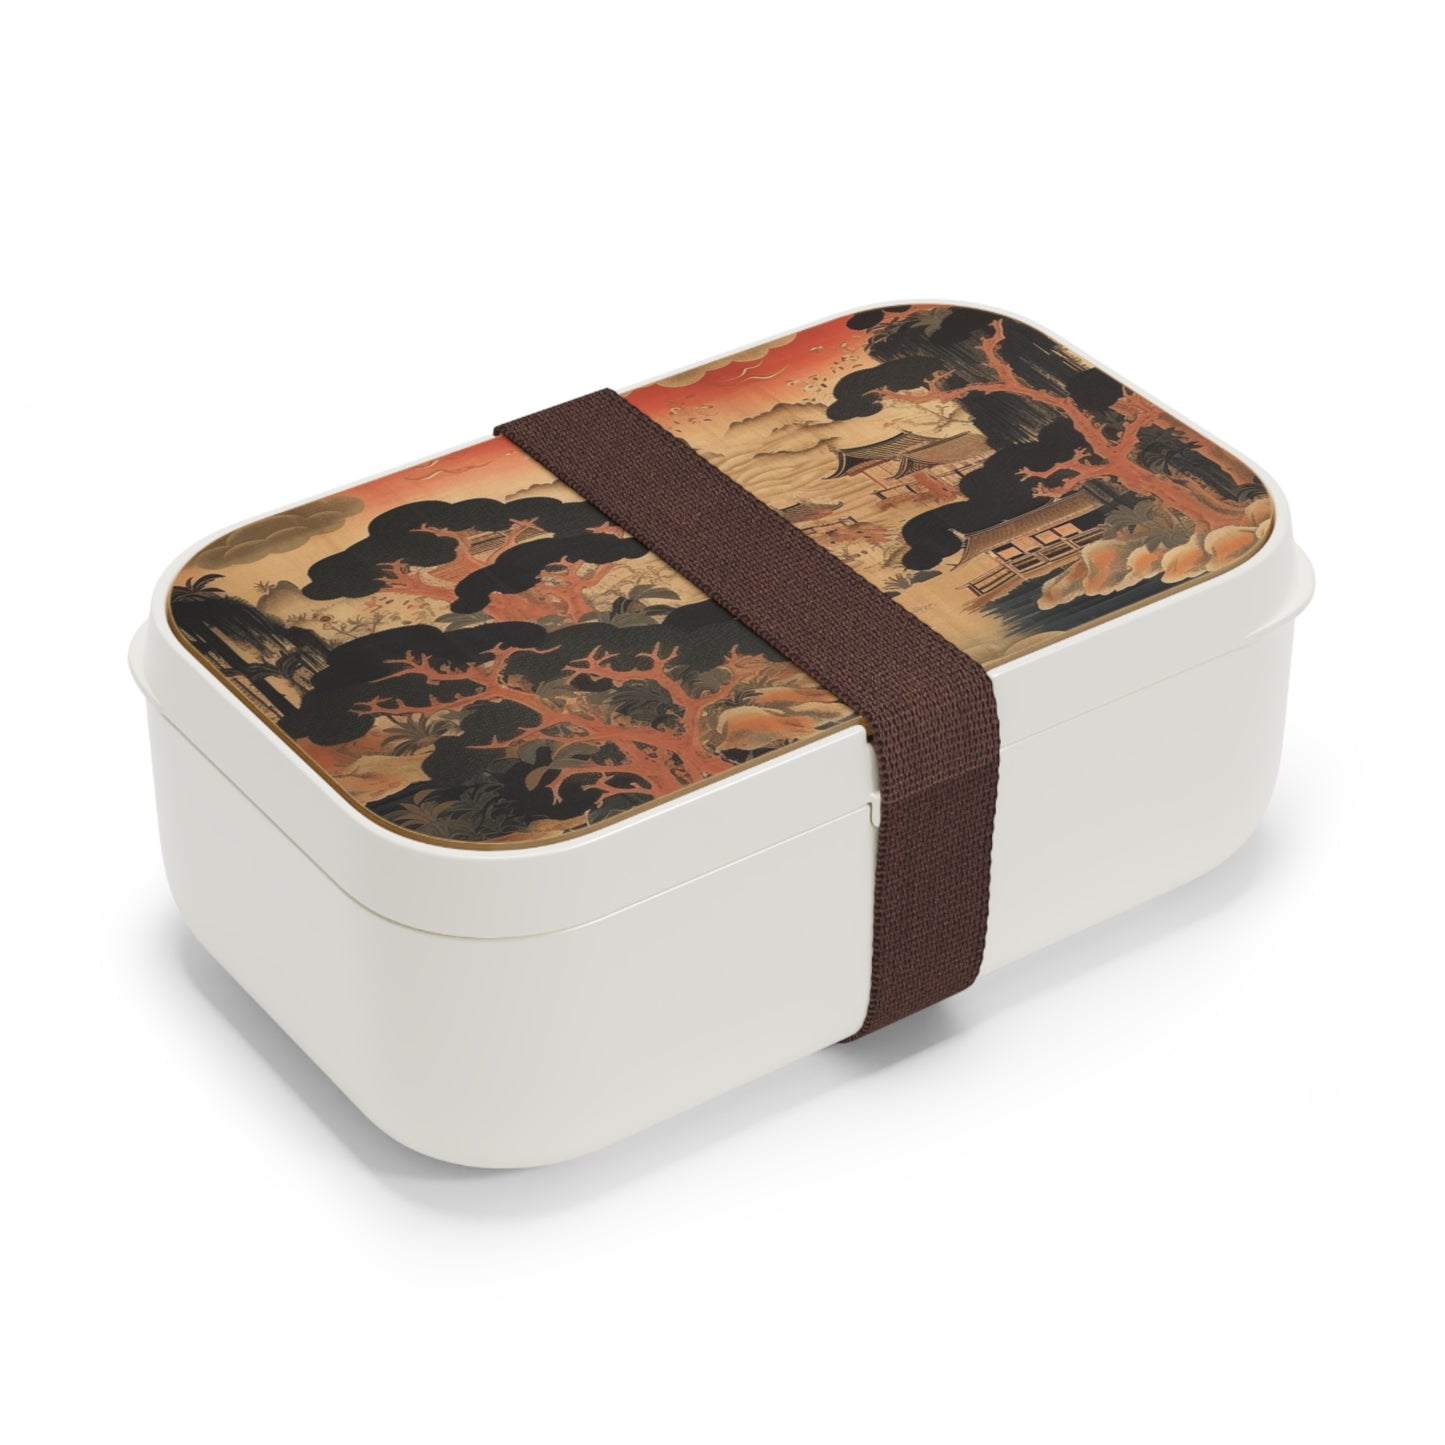 Custom Japanese Tapestry Bento Box: Your Personalized Artistic Statement